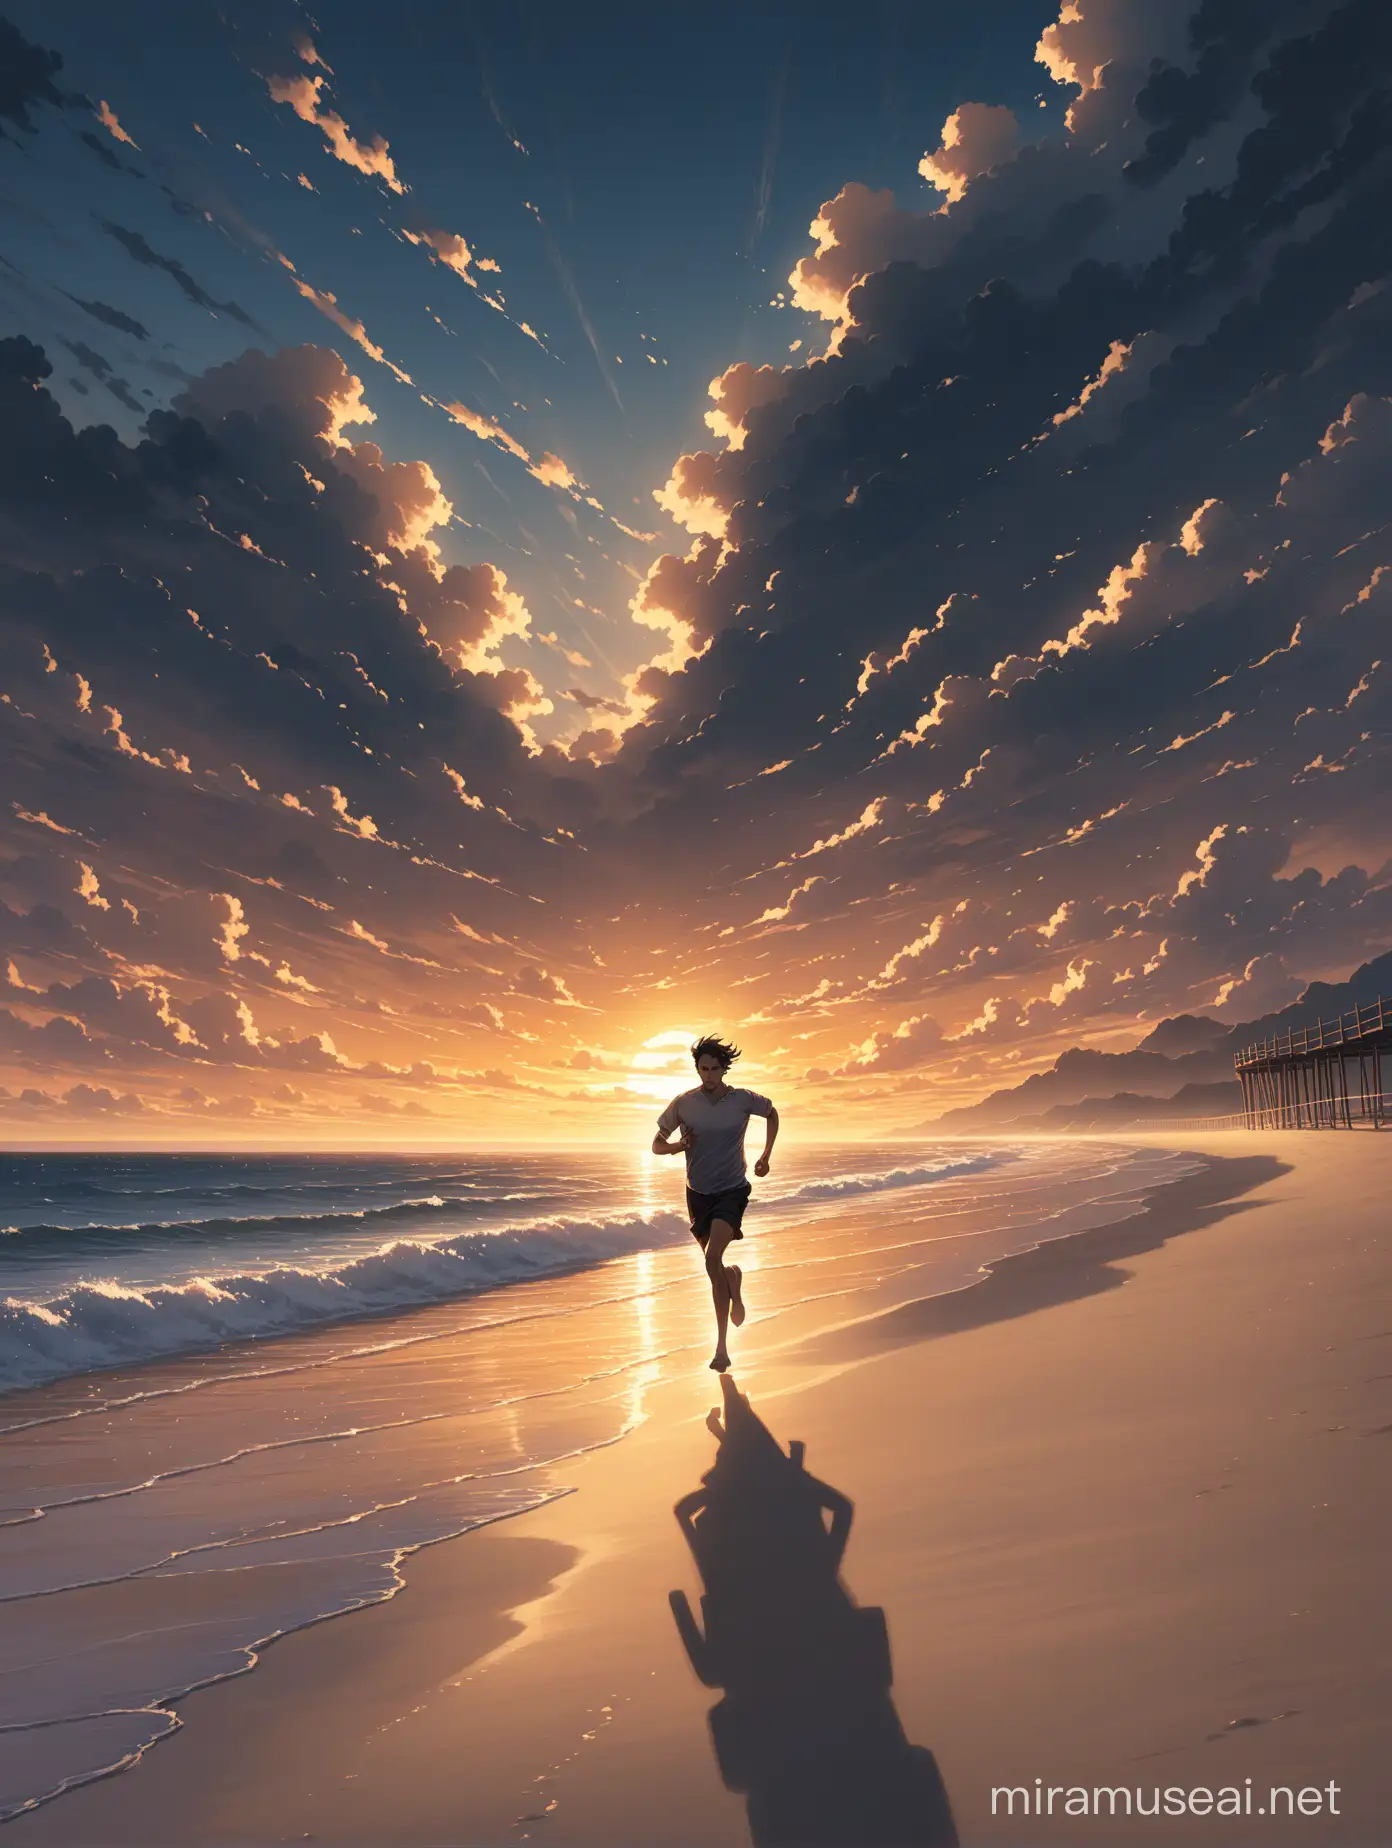 a person running along a tranquil beach at sunrise, as the person moves, drama and chaos are depicted as dark clouds dissipating behind him.